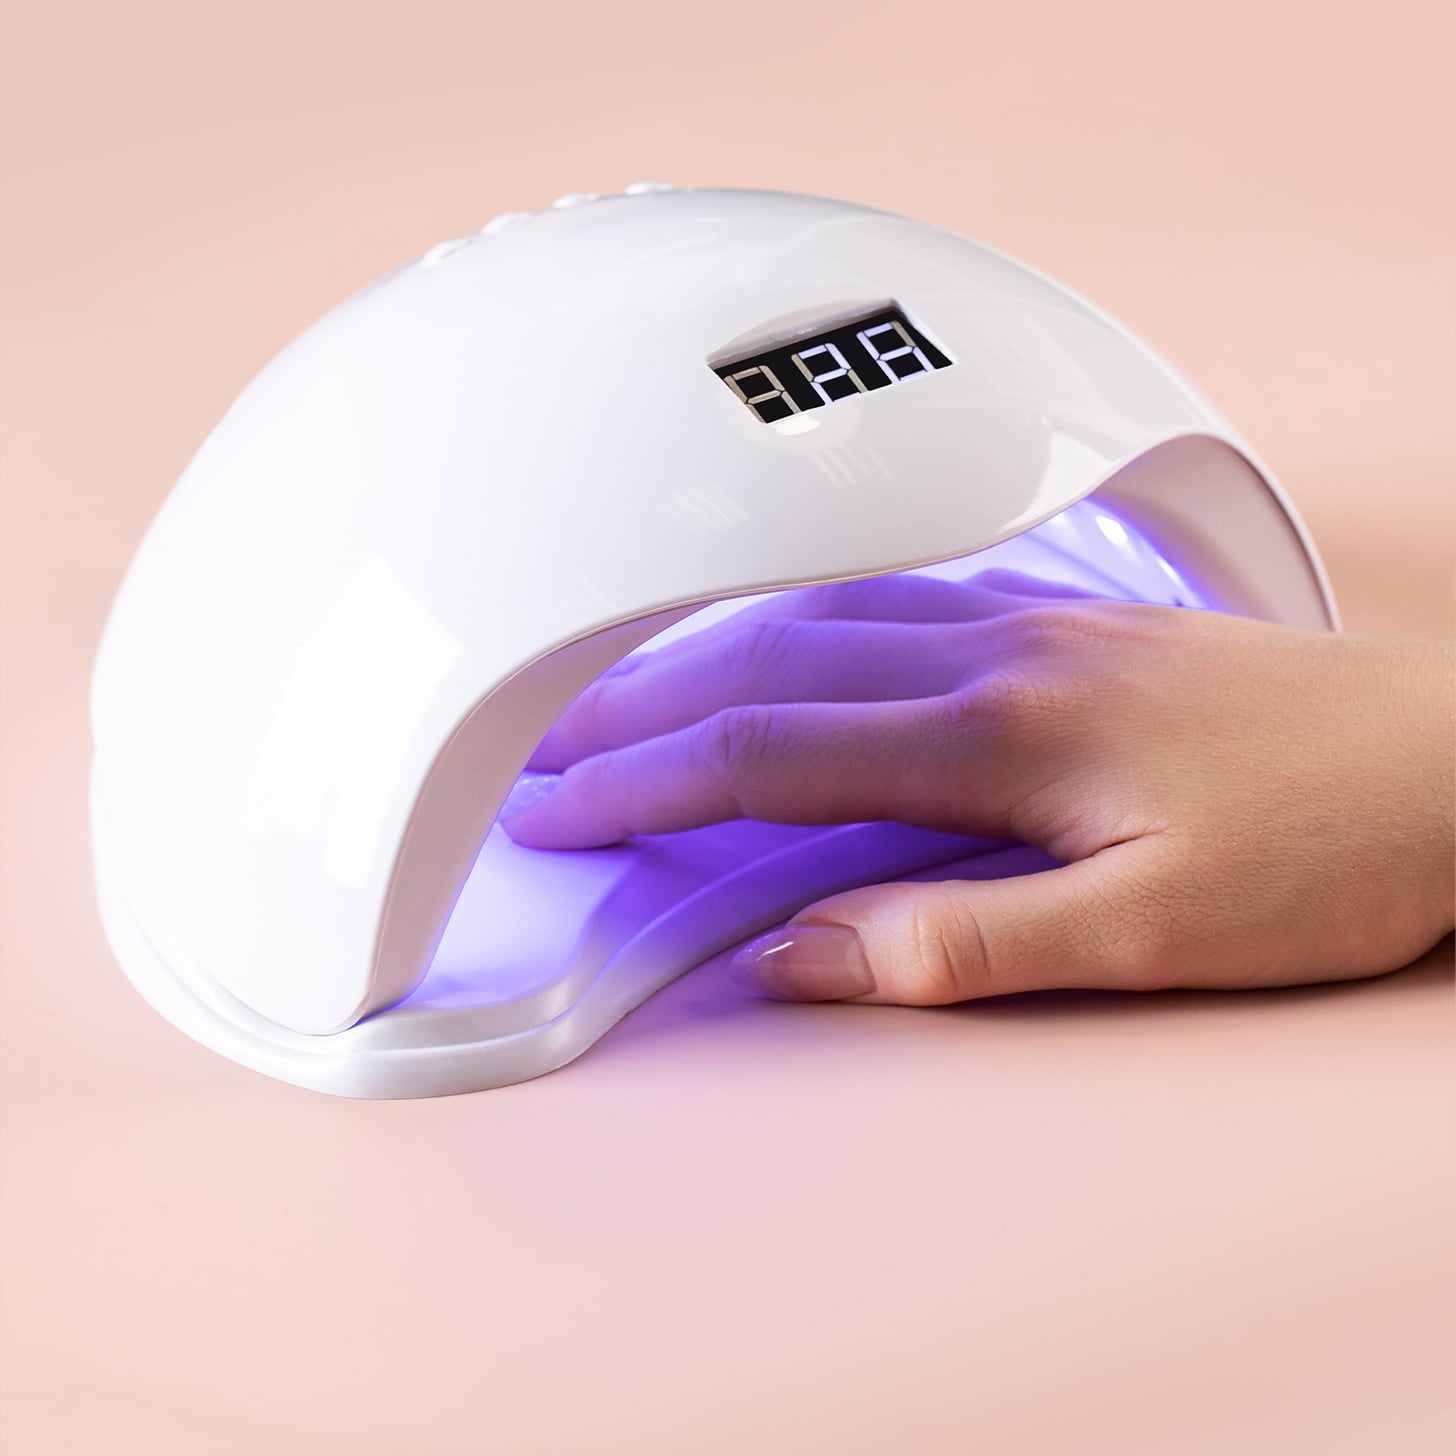 Which nail lamp is safest?